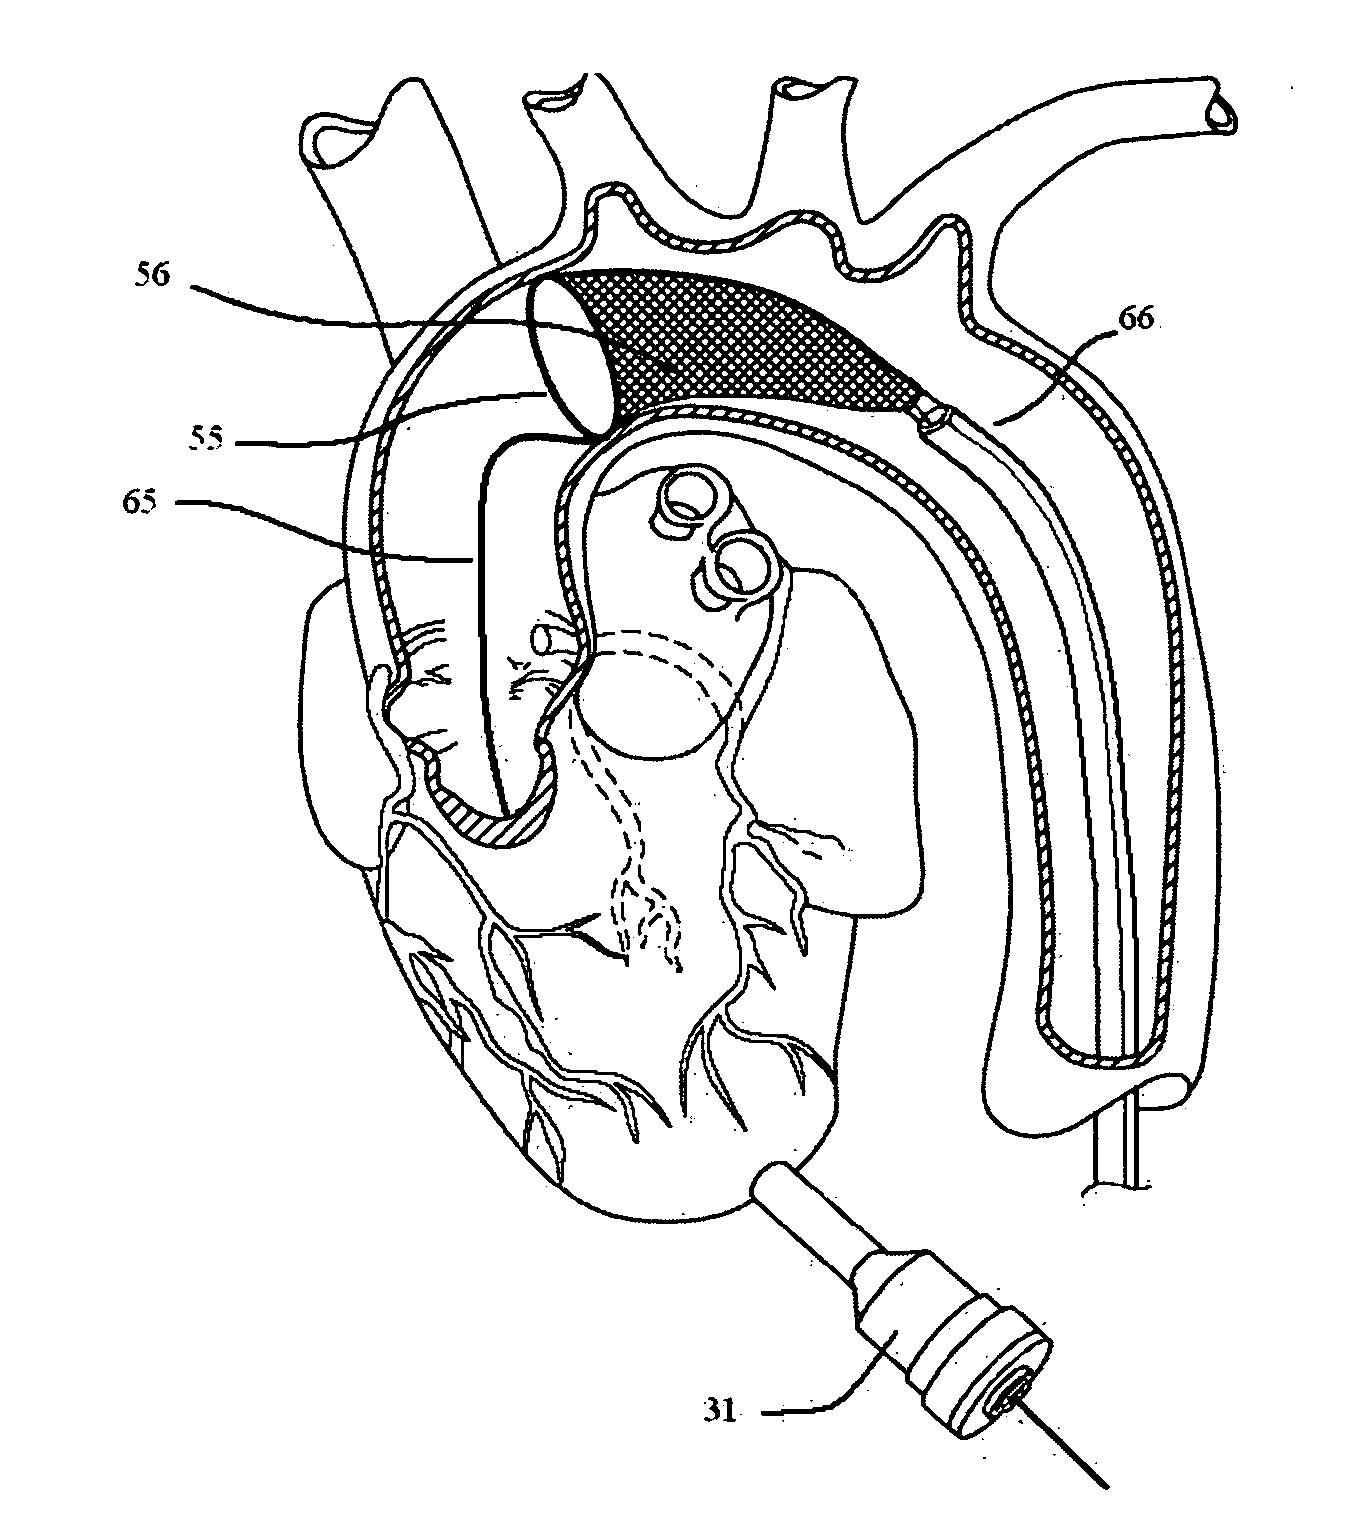 Methods and systems for cardiac valve delivery